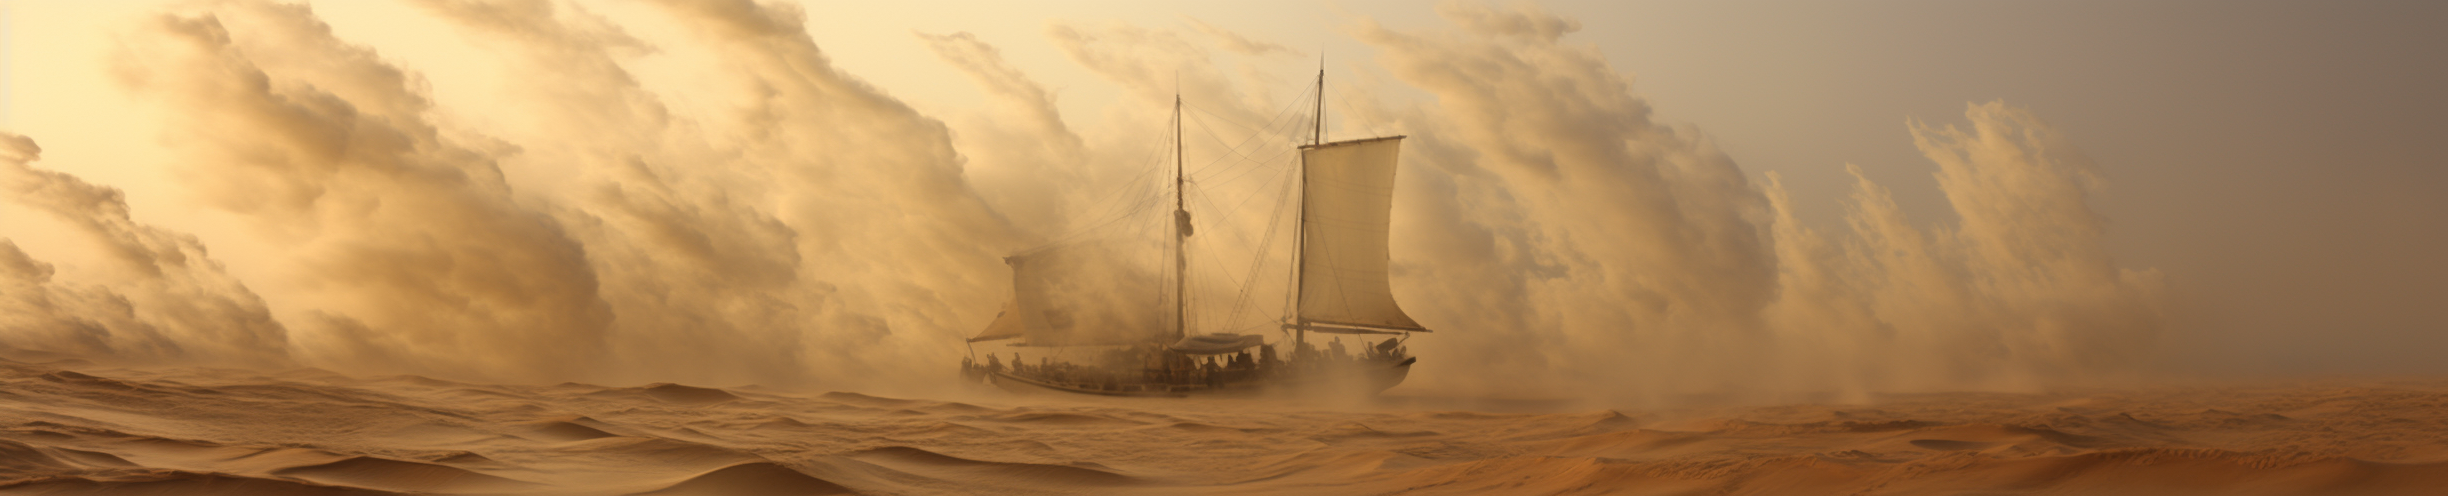 tychodreq_from_the_deck_of_our_sand_schooner_we_watch_as_the_en_f9e2fa1b-8f31-406e-b4c4-333cff858e62.png